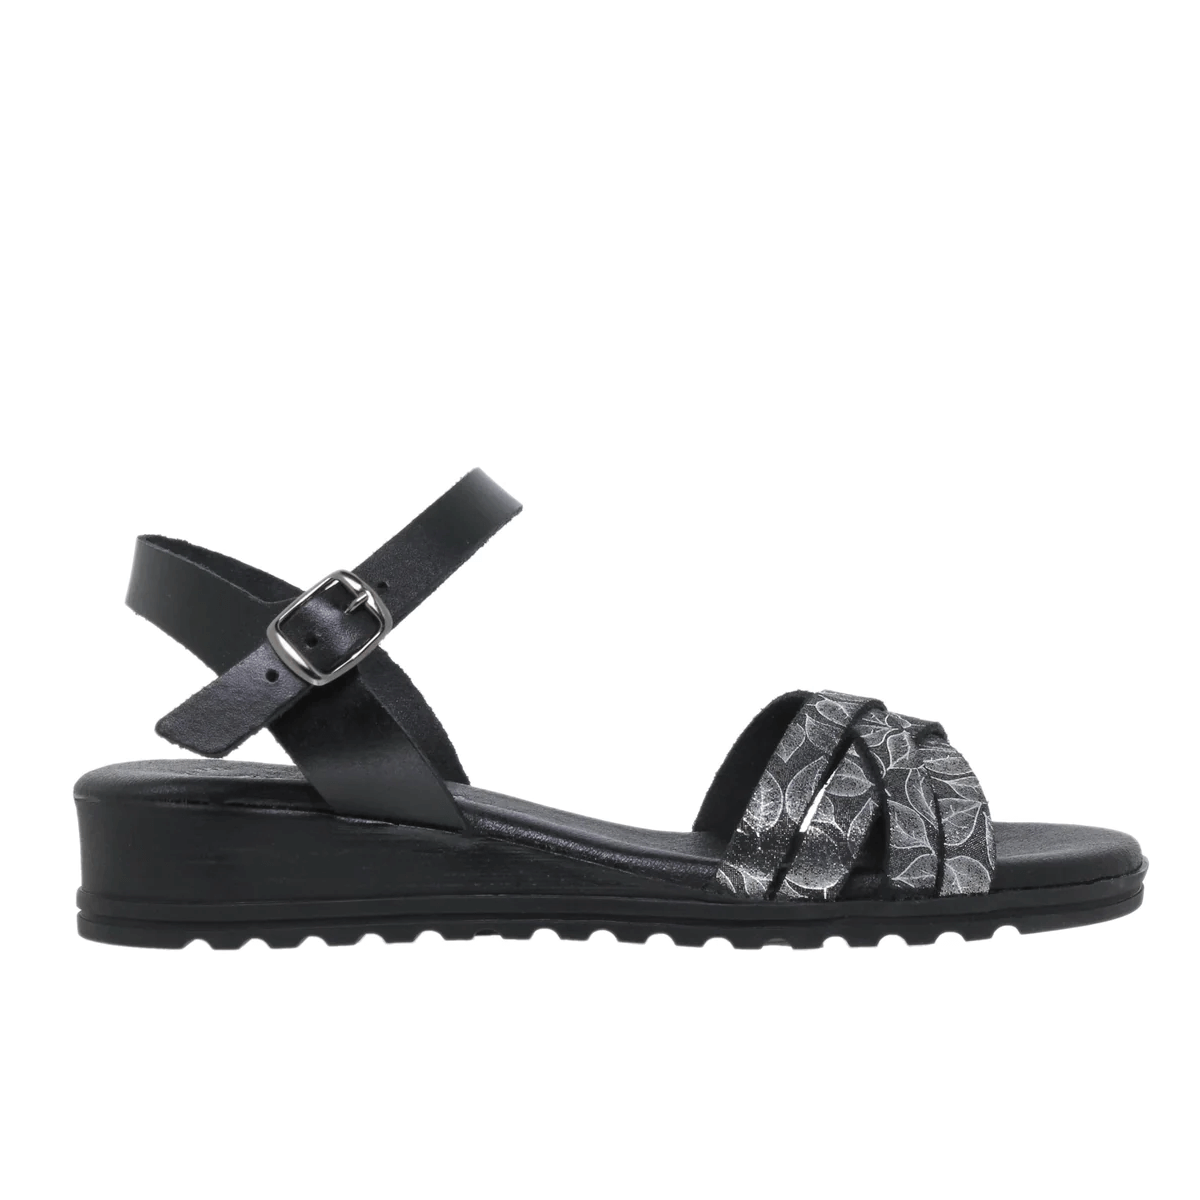 Black leather sandals by Amelie